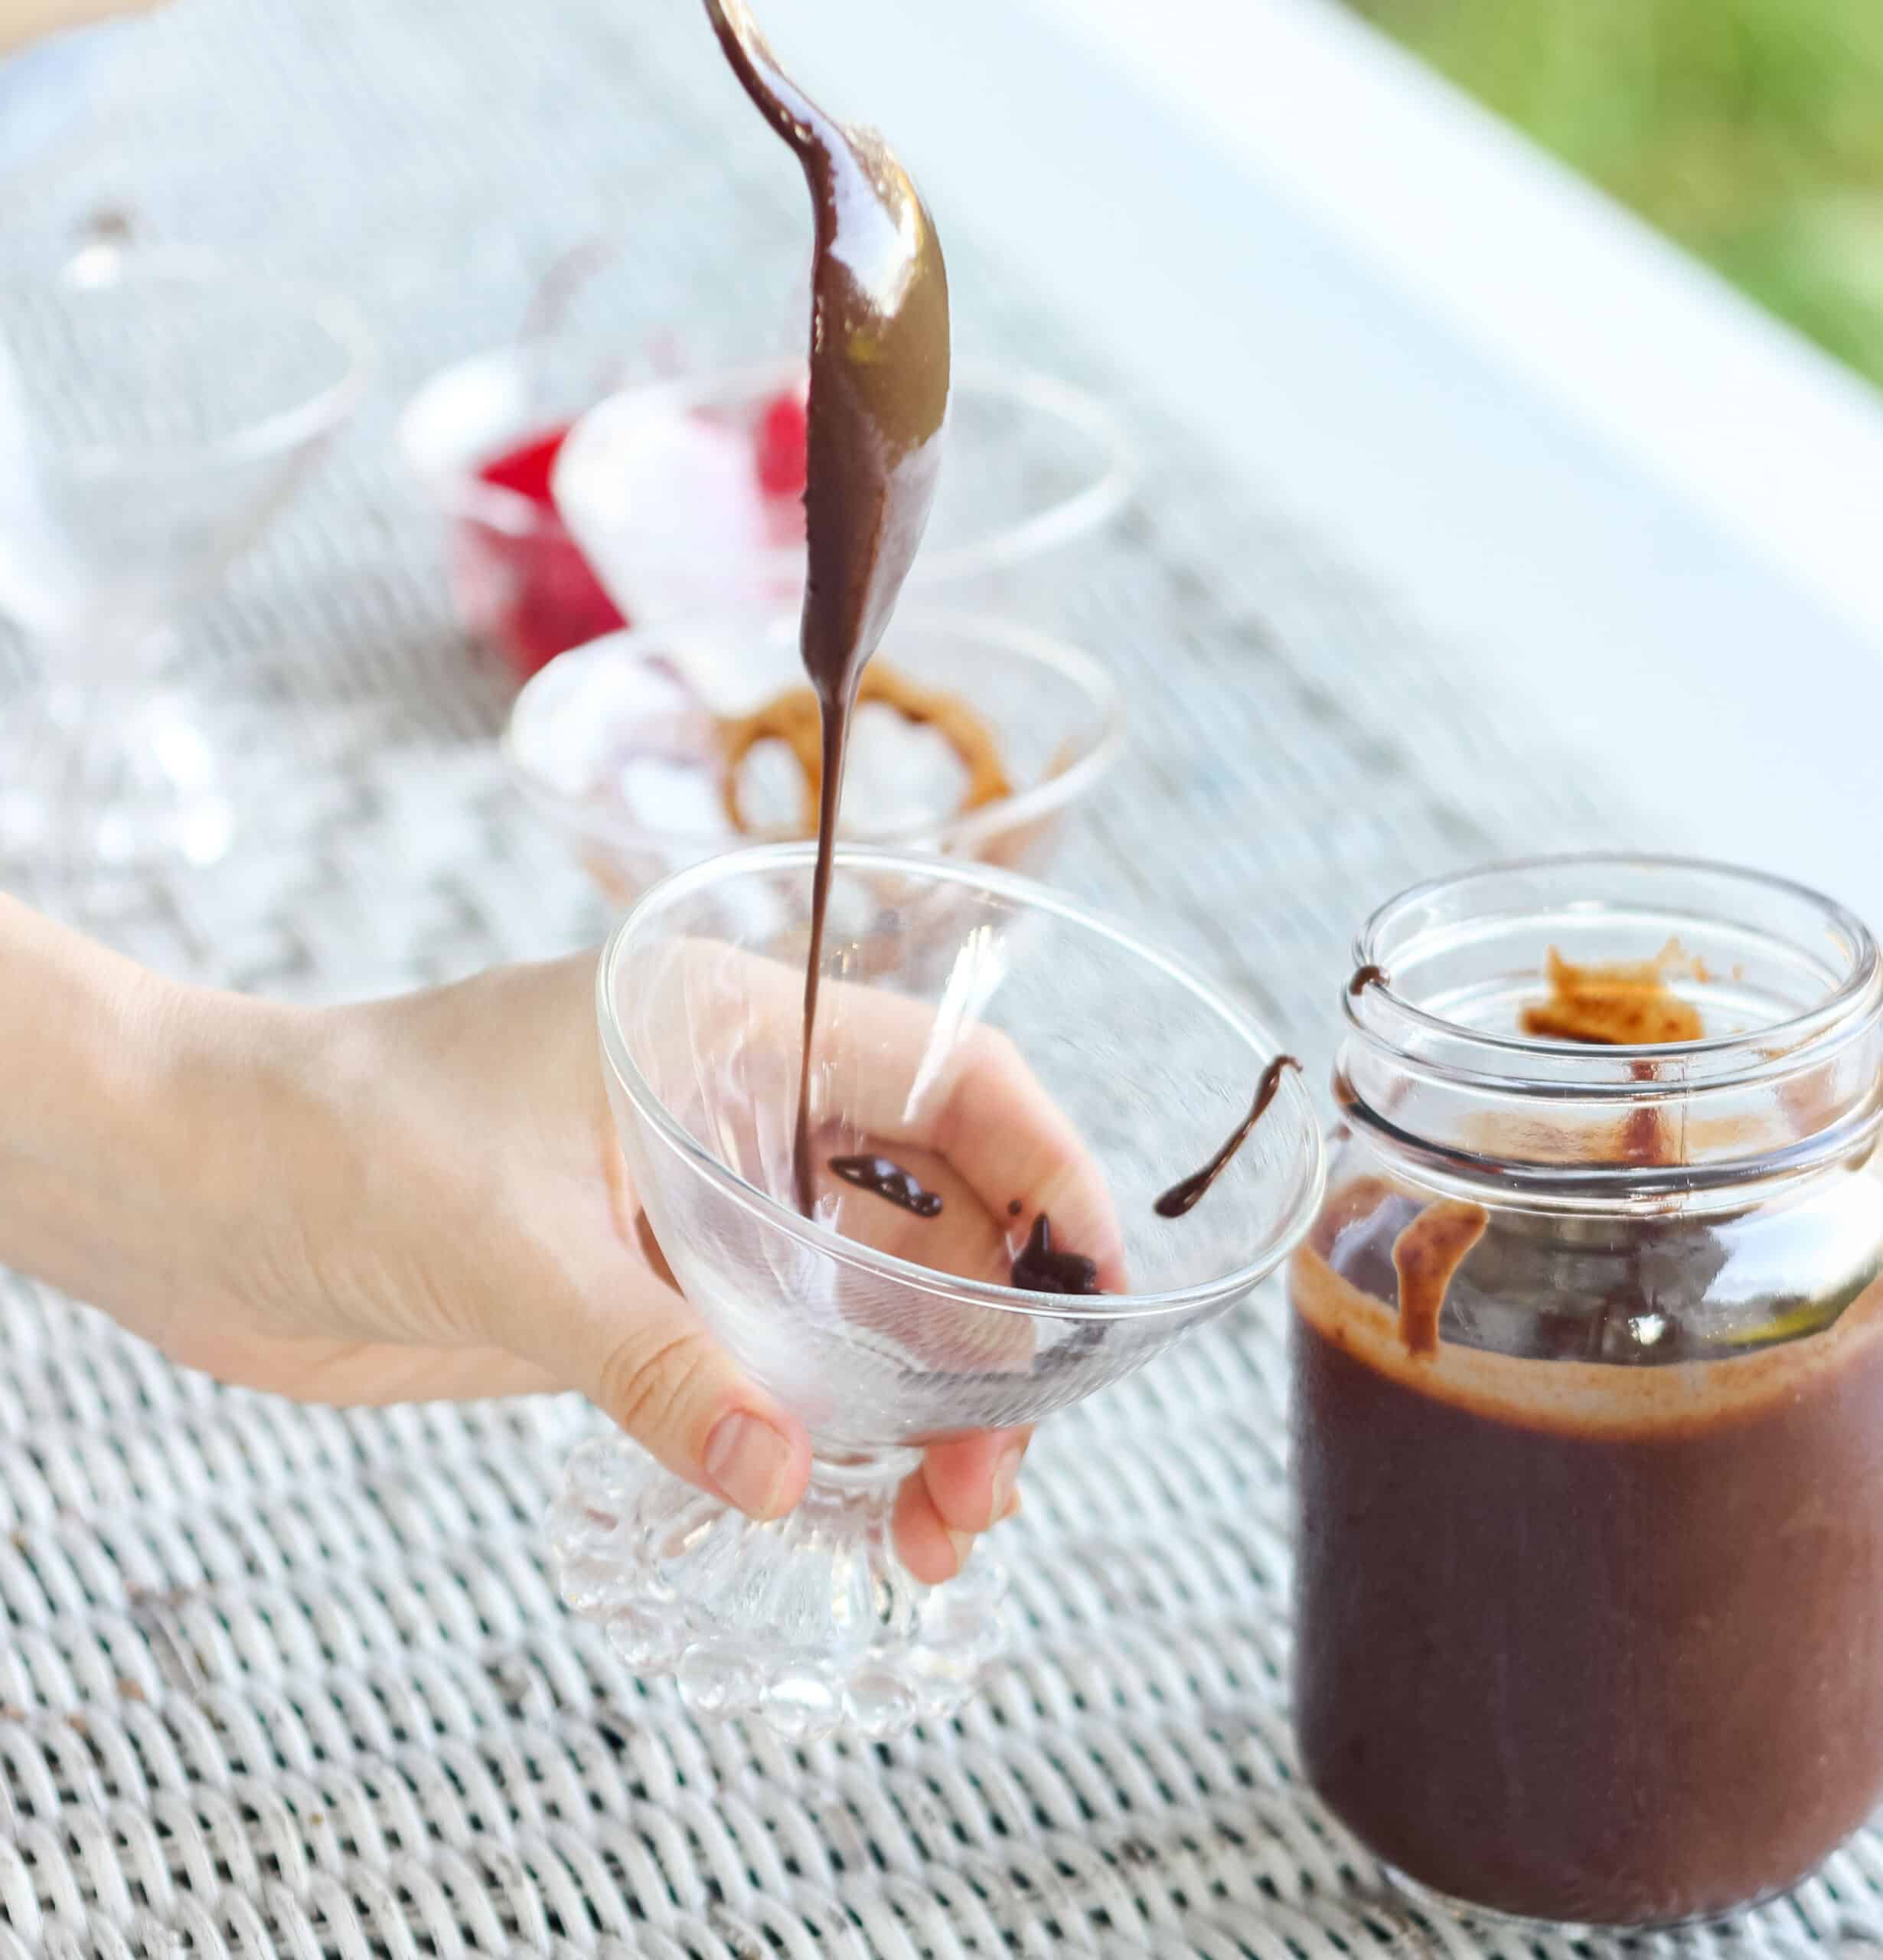 hand holding a glass with a spoon is drizzling chocolate sauce into the glass with a jar of chocolate sauce on the side